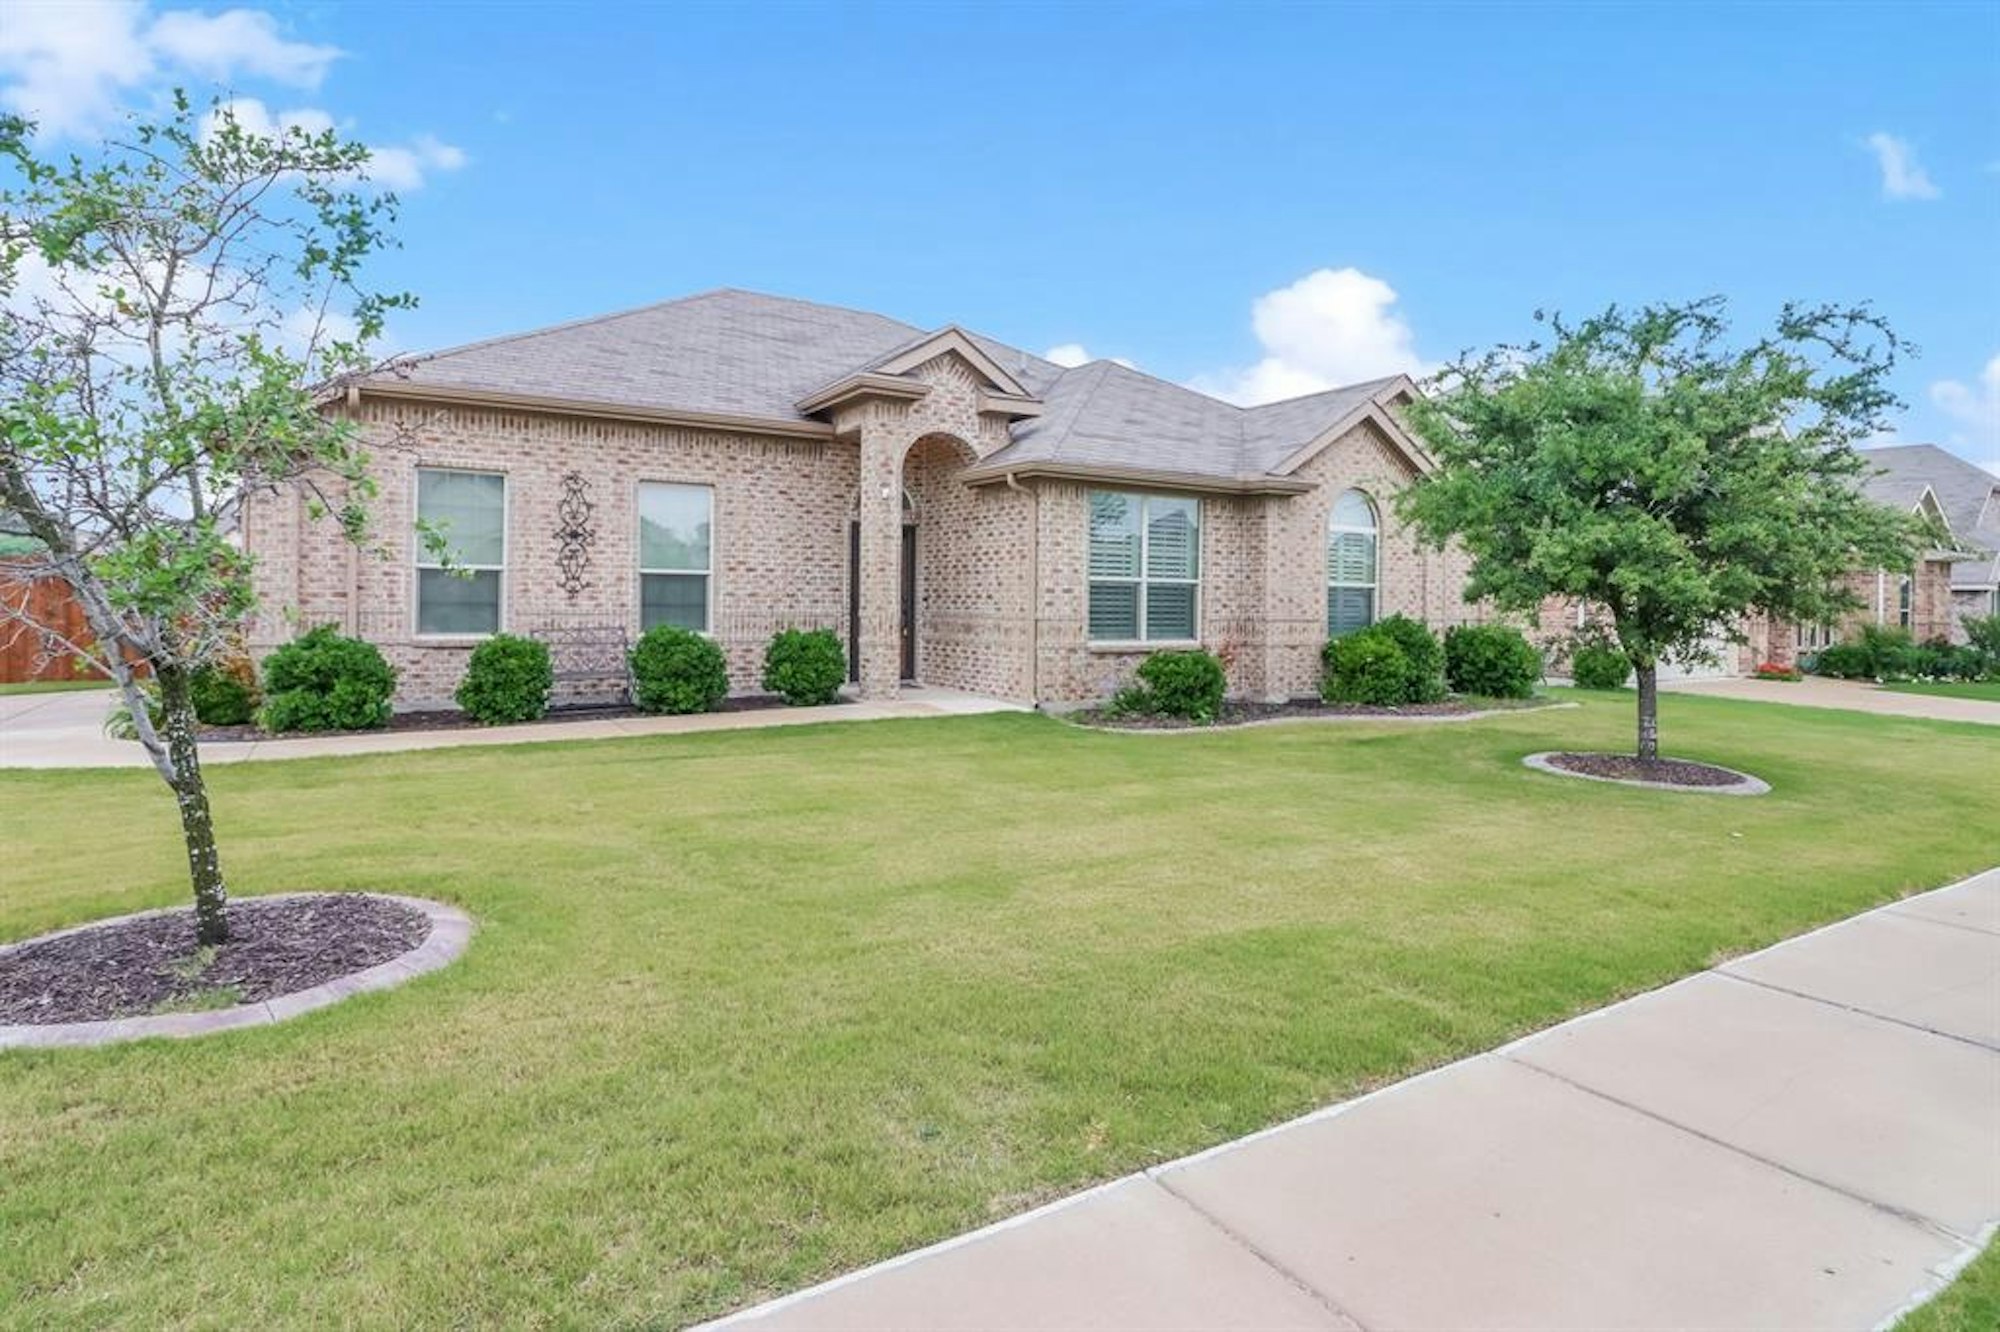 Photo 1 of 25 - 1629 Signature Dr, Weatherford, TX 76087